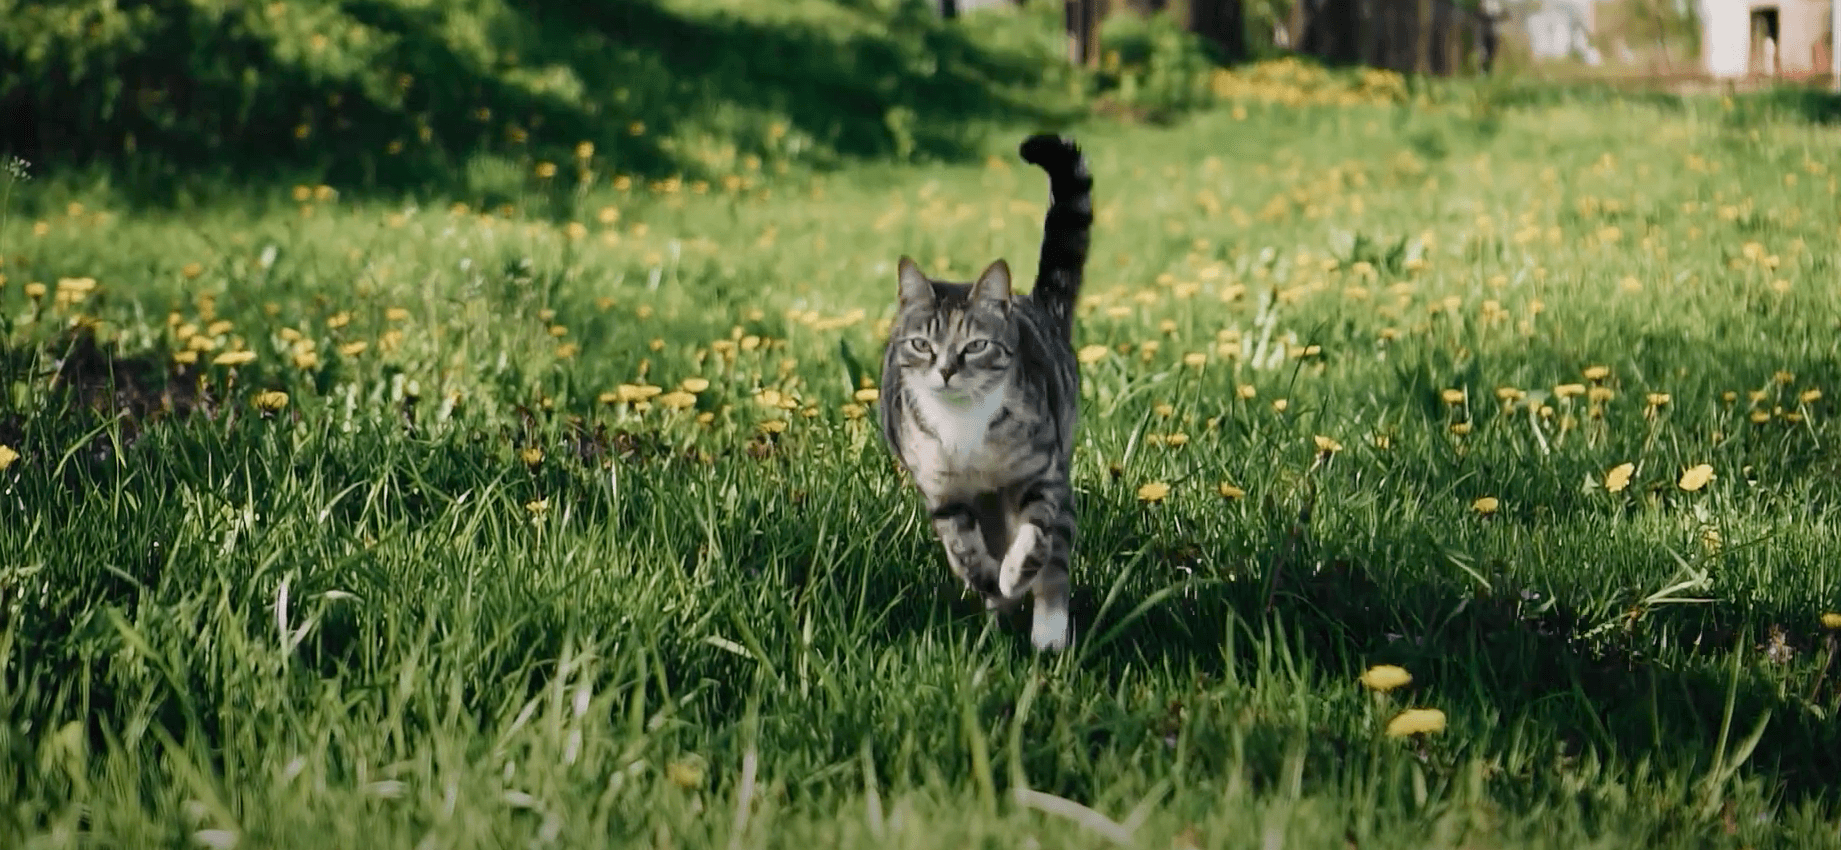 An image of a cat roaming in the grass